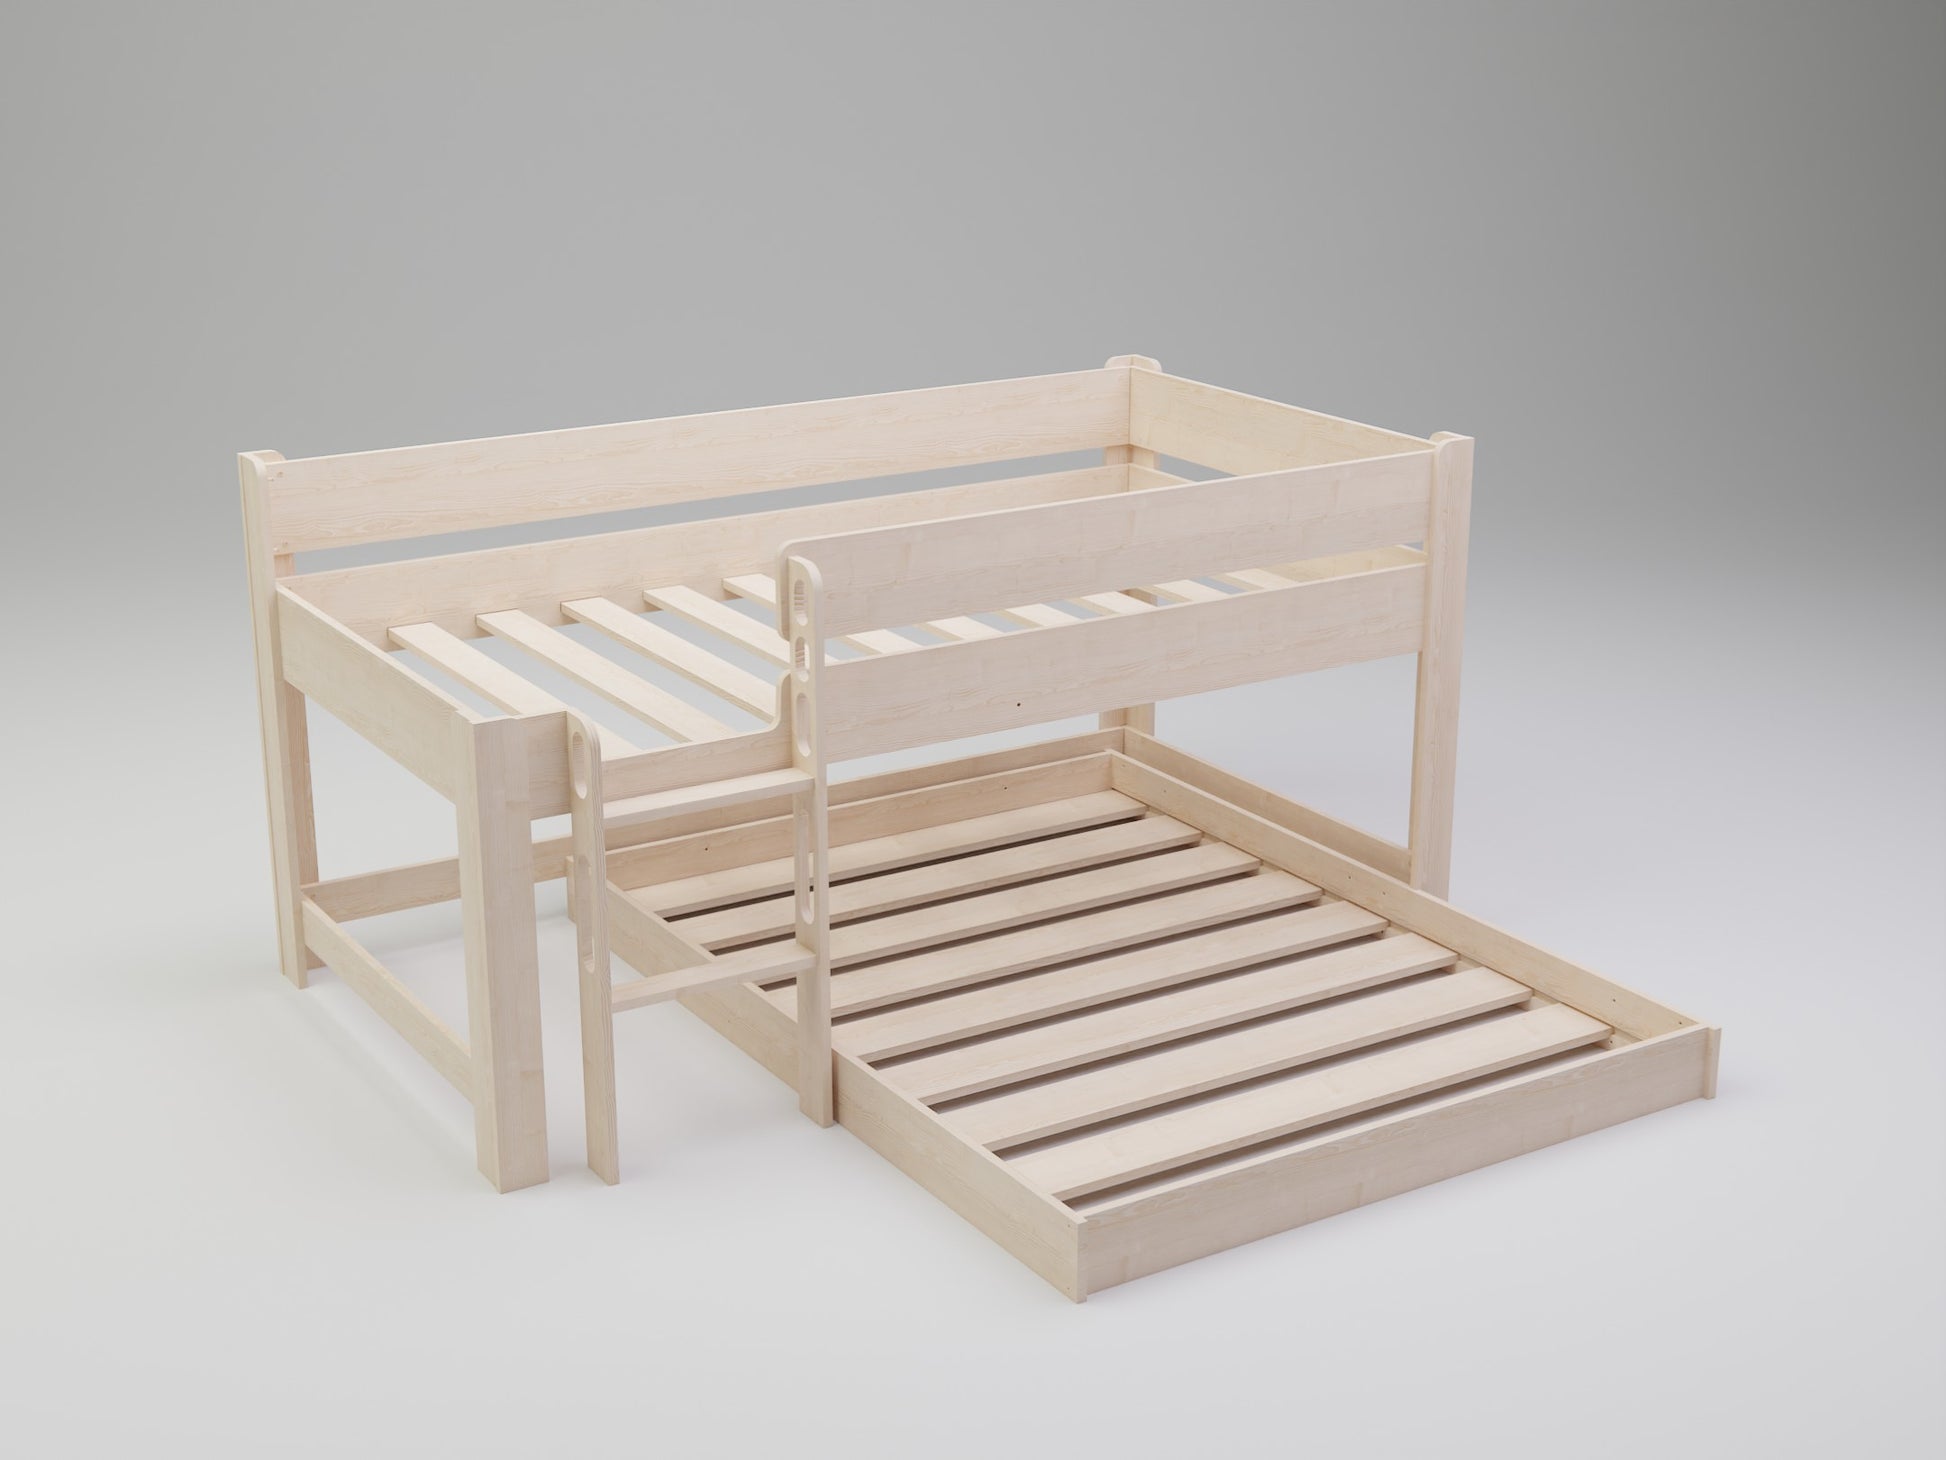 Our L shaped bed design, perfect for siblings, promises style, safety, and unparalleled comfort.